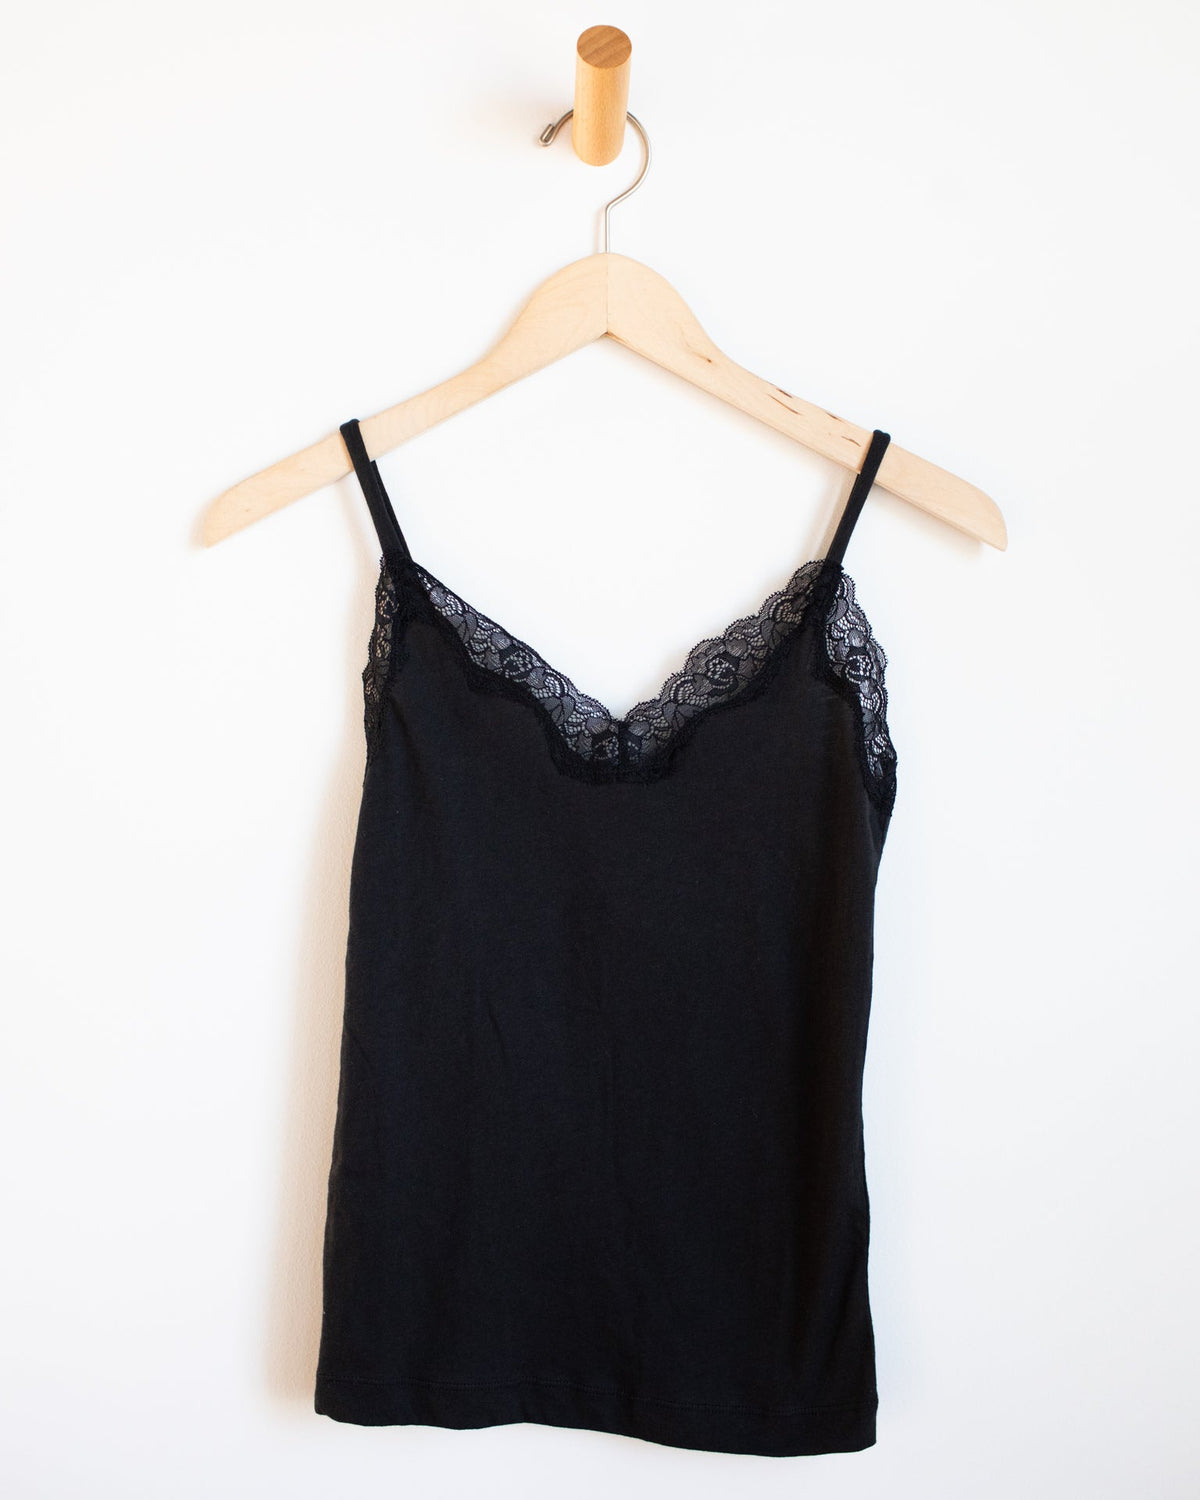 Only Hearts Lingerie Org Cttn w/ Lace Cami in Black